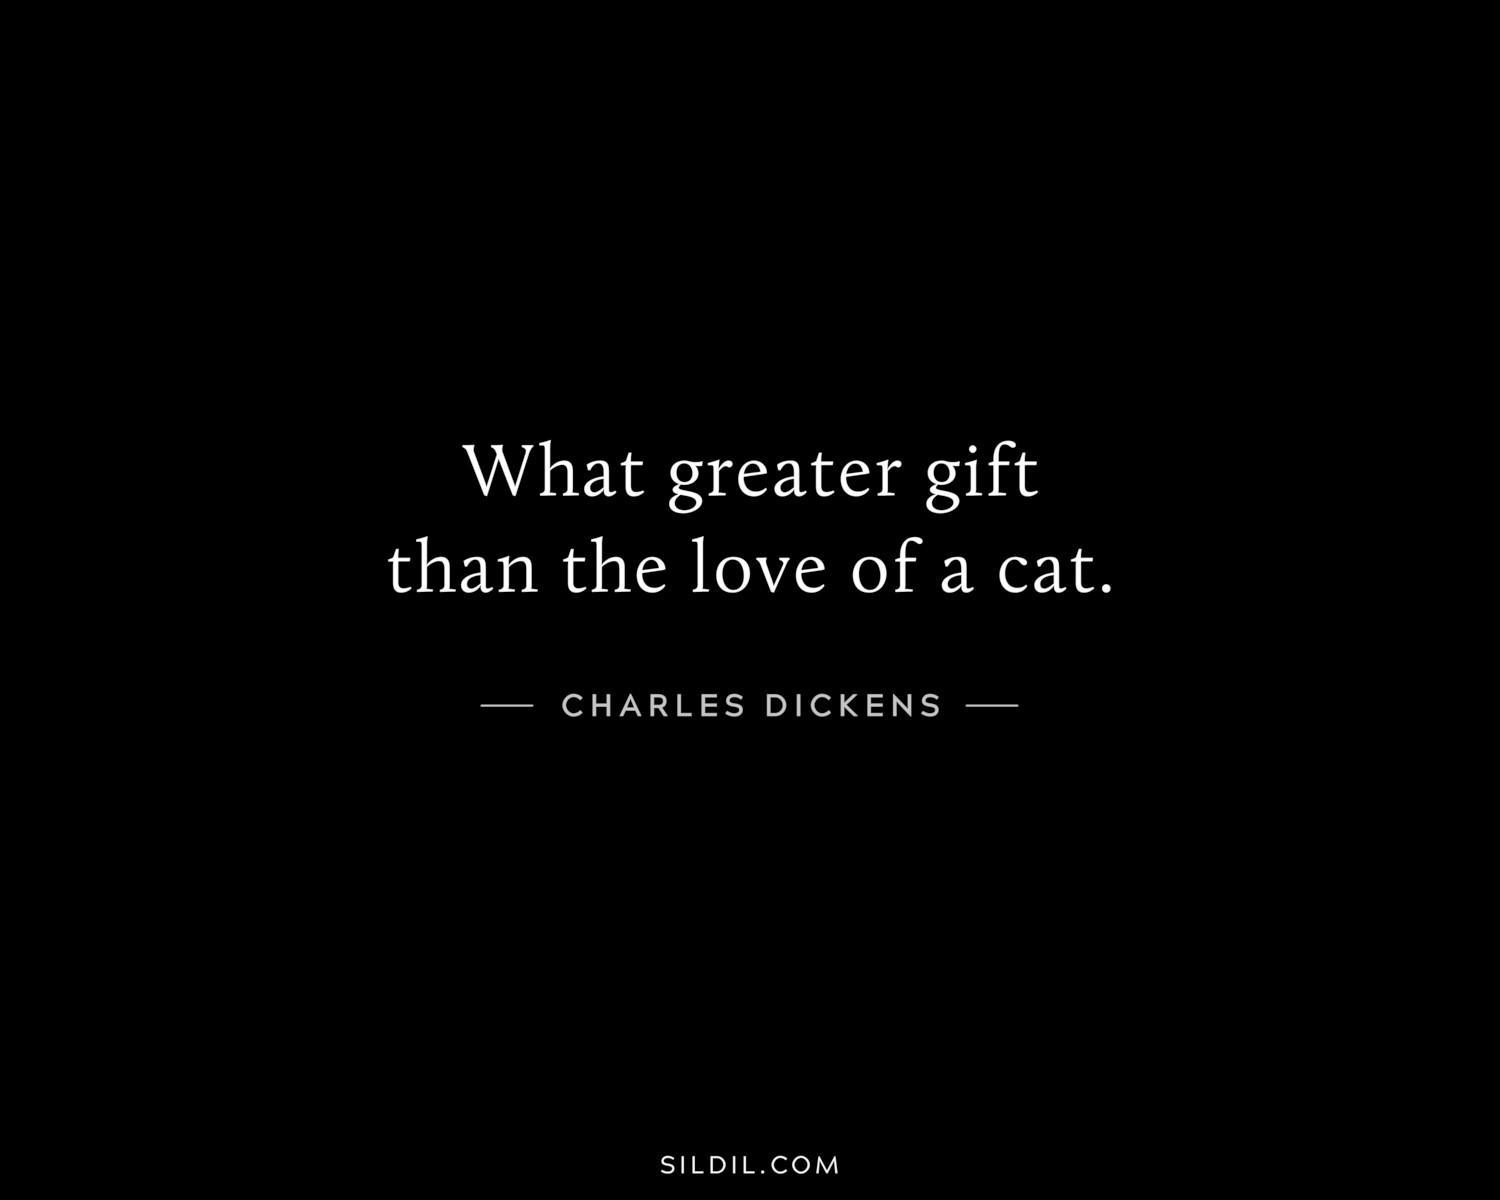 What greater gift than the love of a cat.